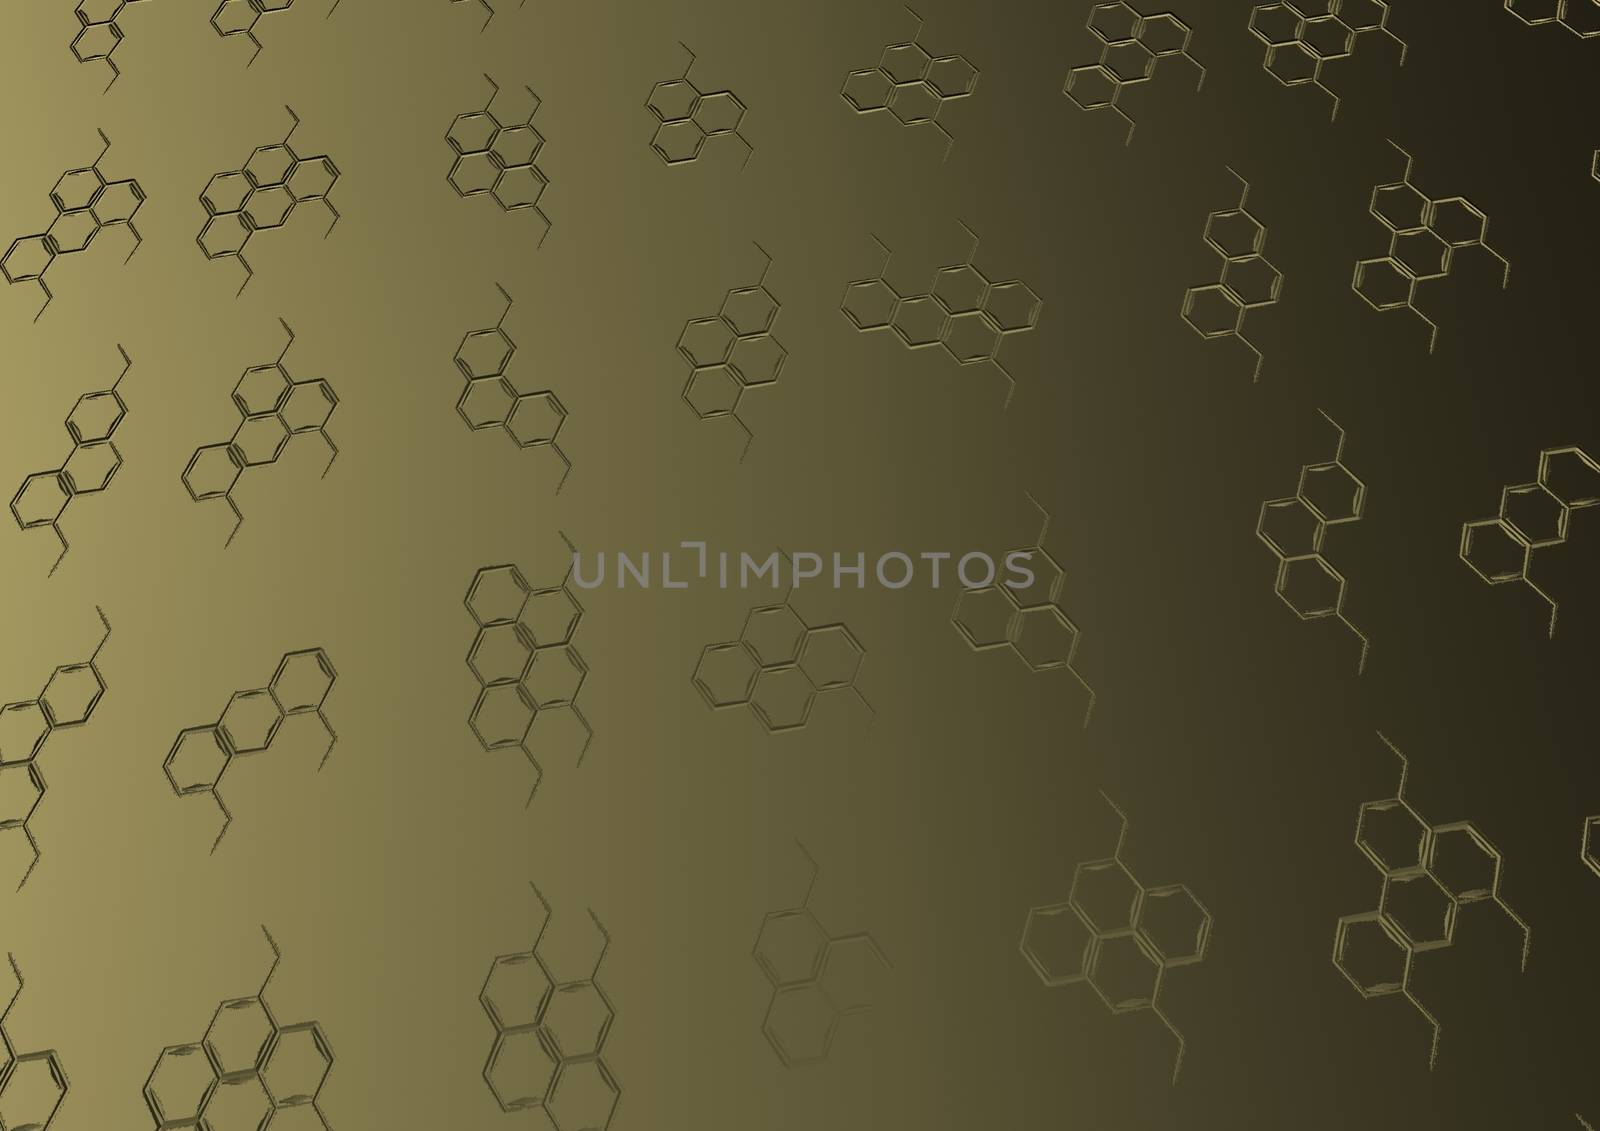 Background with structural chemical formulas by richter1910